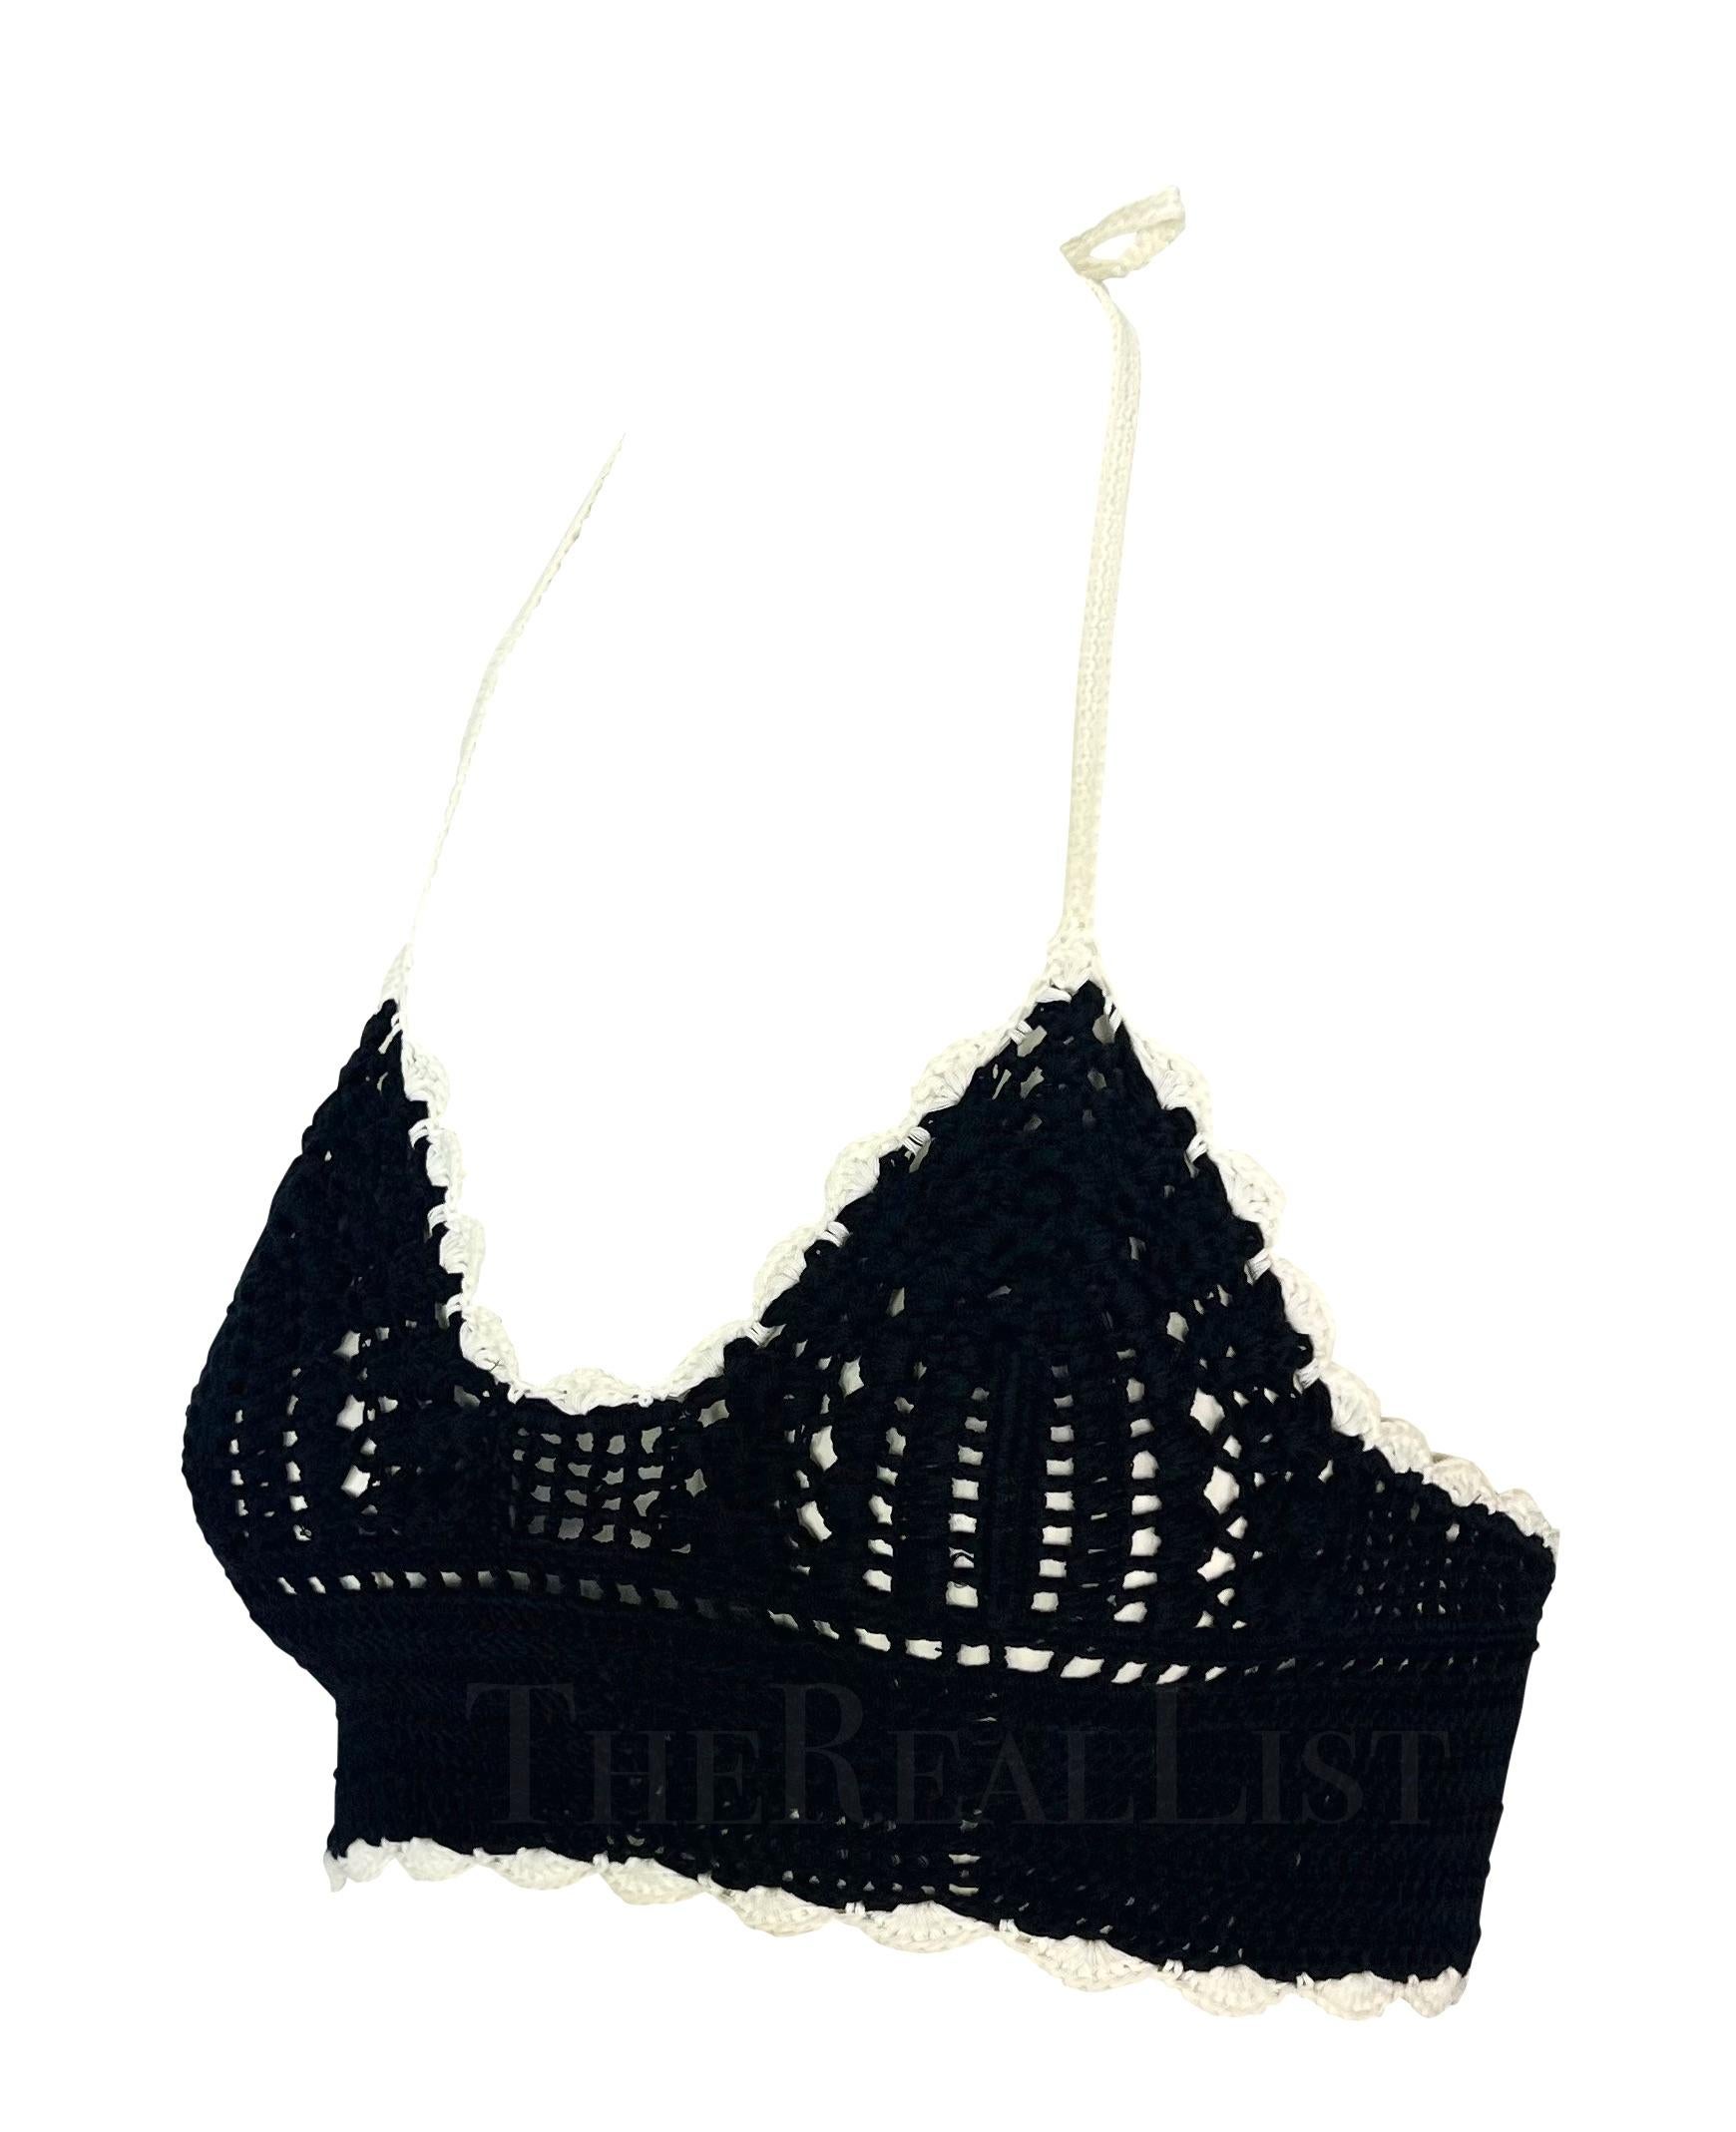 Presenting a fabulous black halterneck Chanel crochet crop top, designed by Karl Lagerfeld. From the Spring/Summer 2004 collection, the black crochet design is elevated with intricate white detailing at the hem. This chic top is the perfect elevated